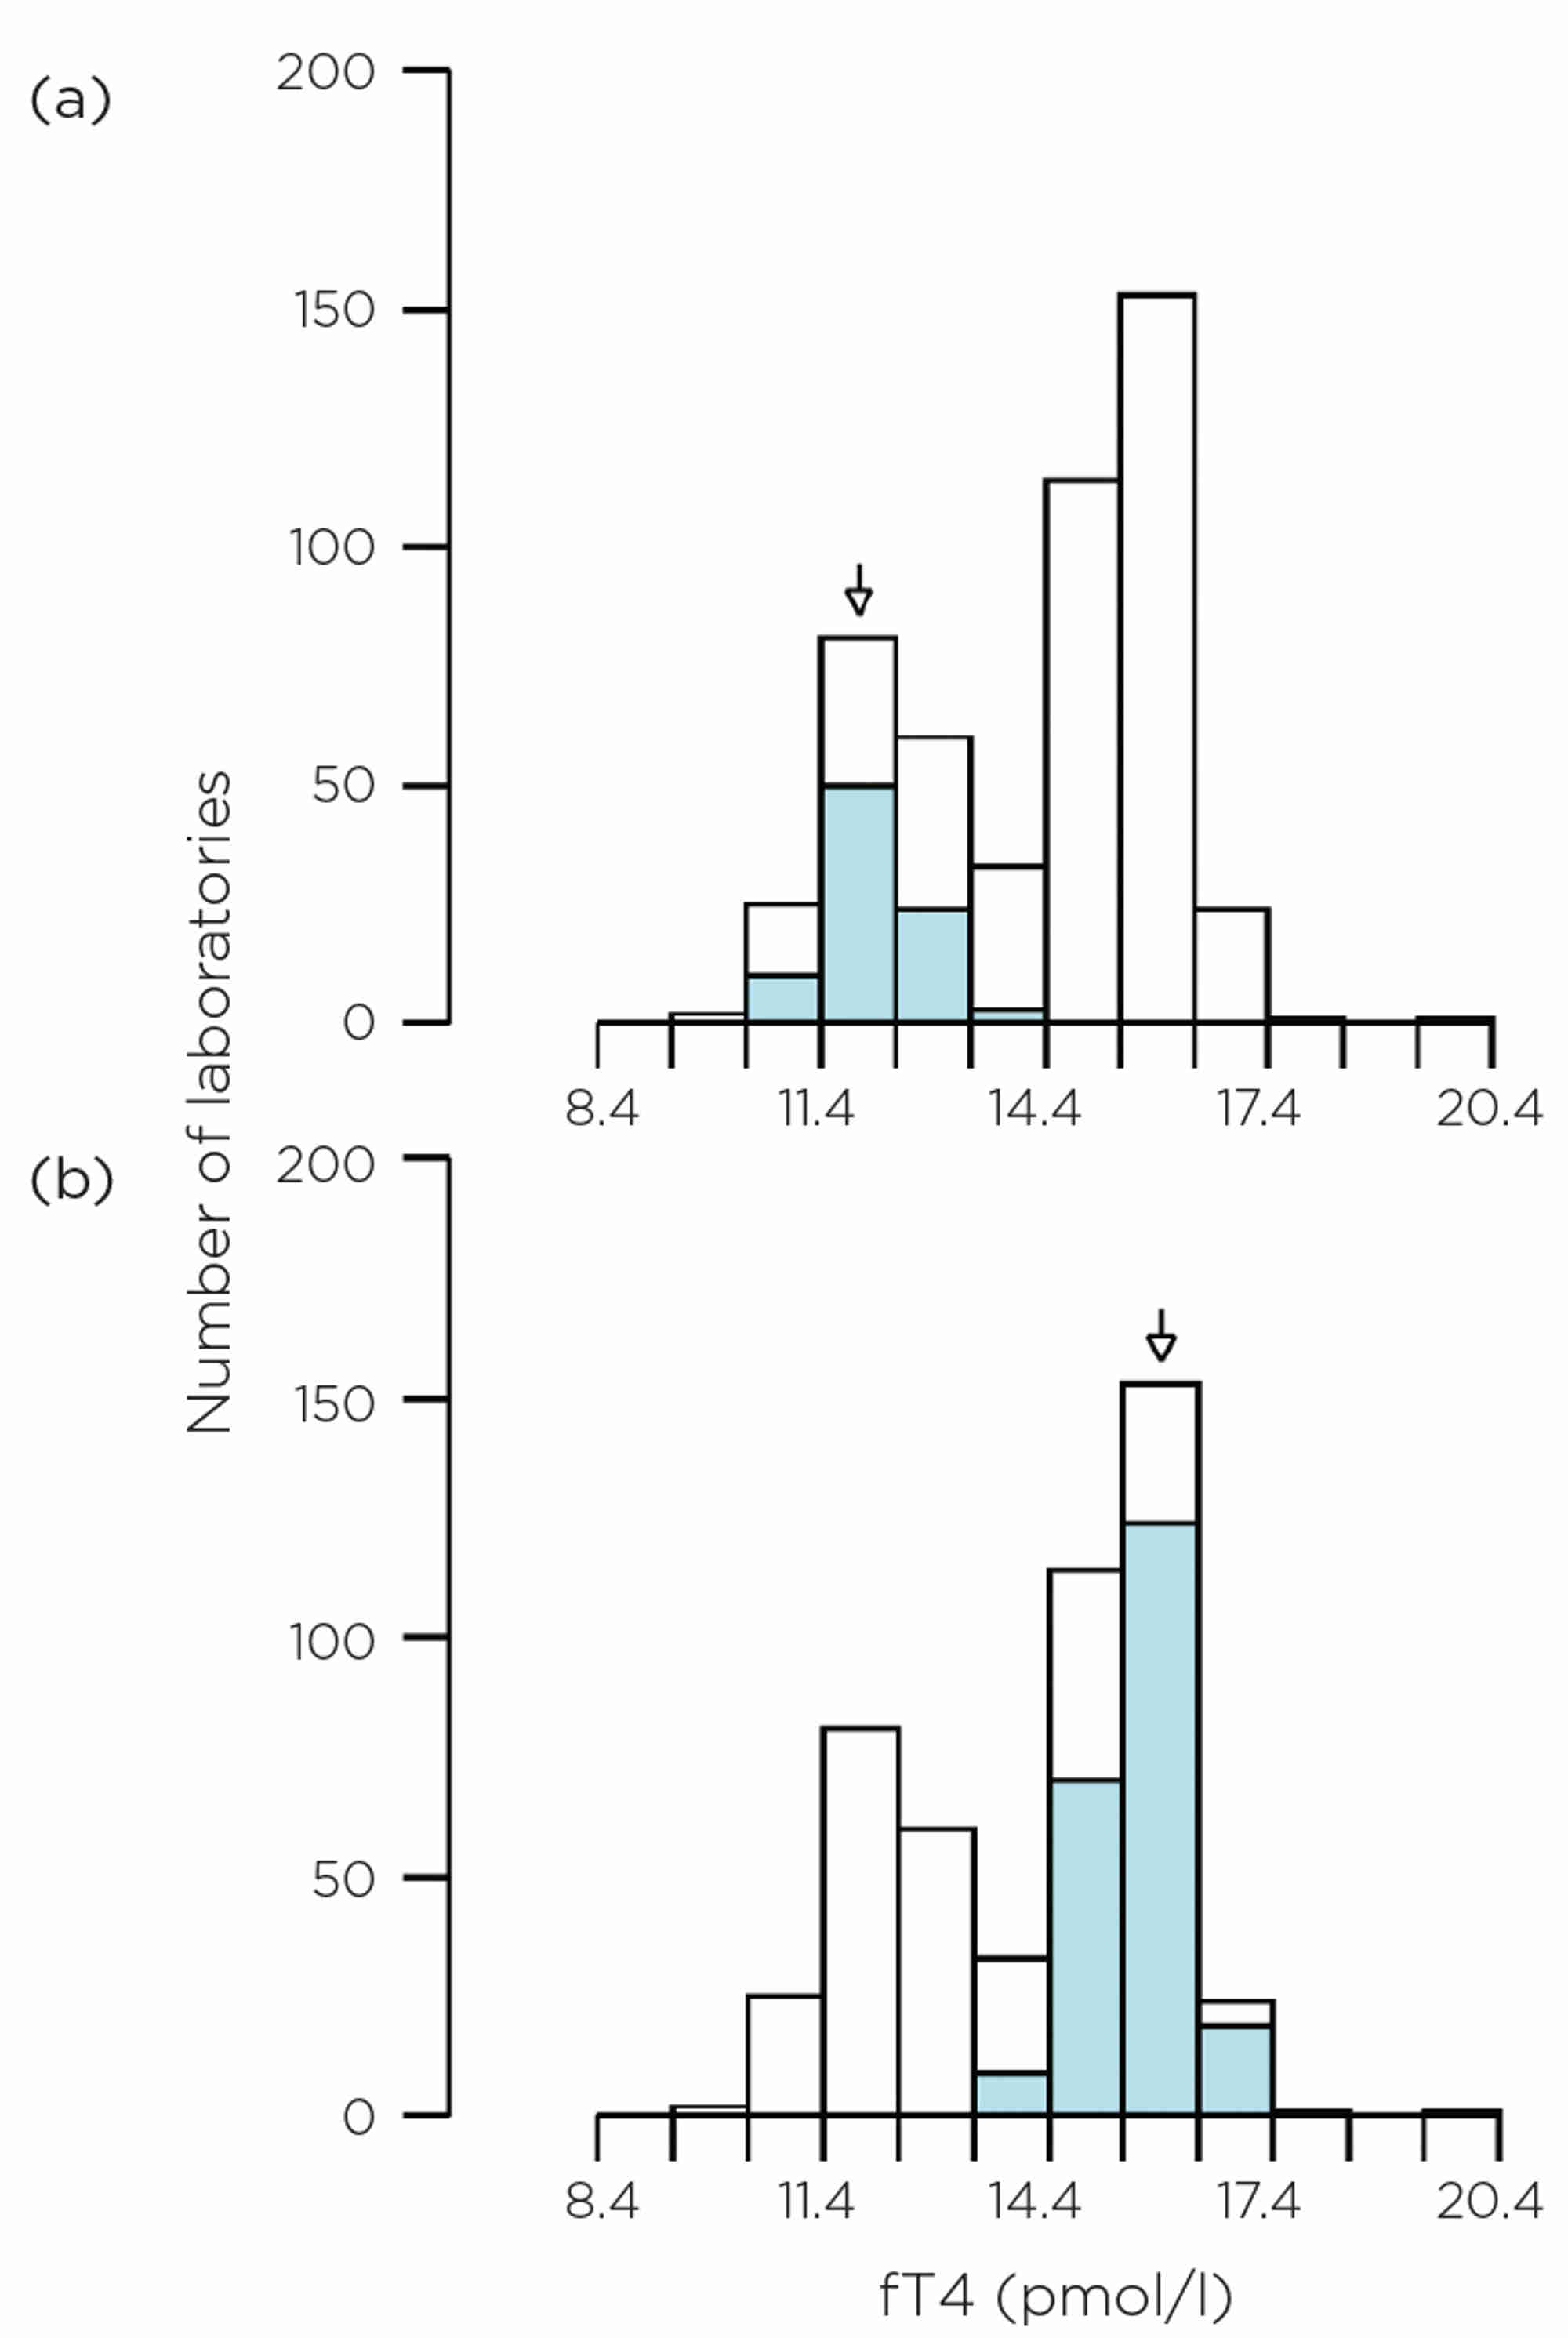 Figure 1. EQA data for fT4 in 2023 on an unmanipulated, native, euthyroid, pooled human serum. The histogram shows all data, but the blue-coloured sections are for (a) Abbott Alinity and (b) Roche Cobas respectively.